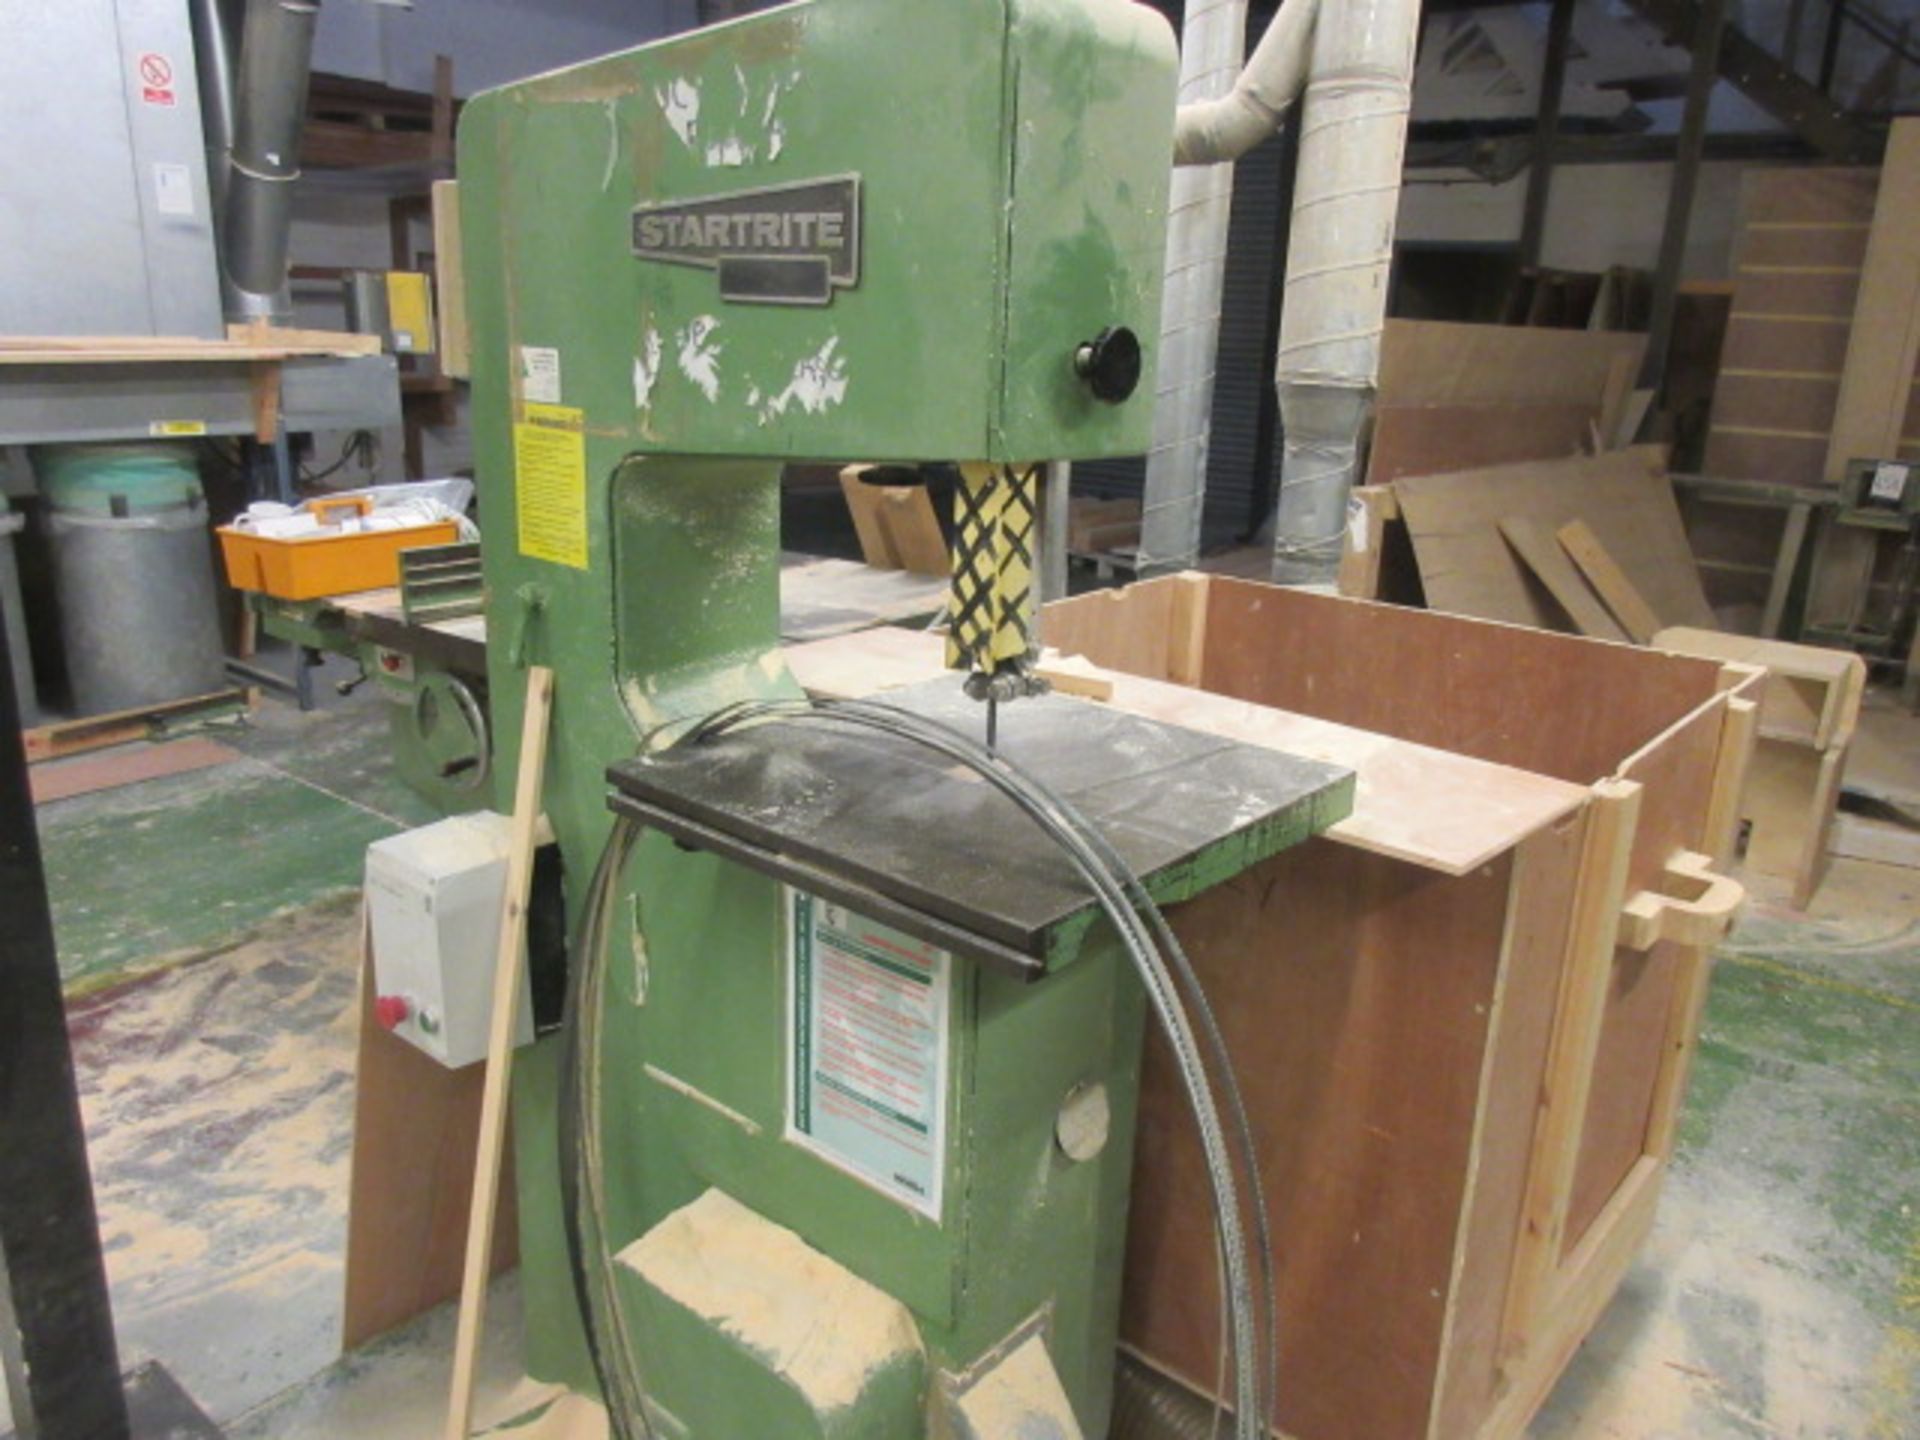 Startrite 18 T 10 vertical band saw